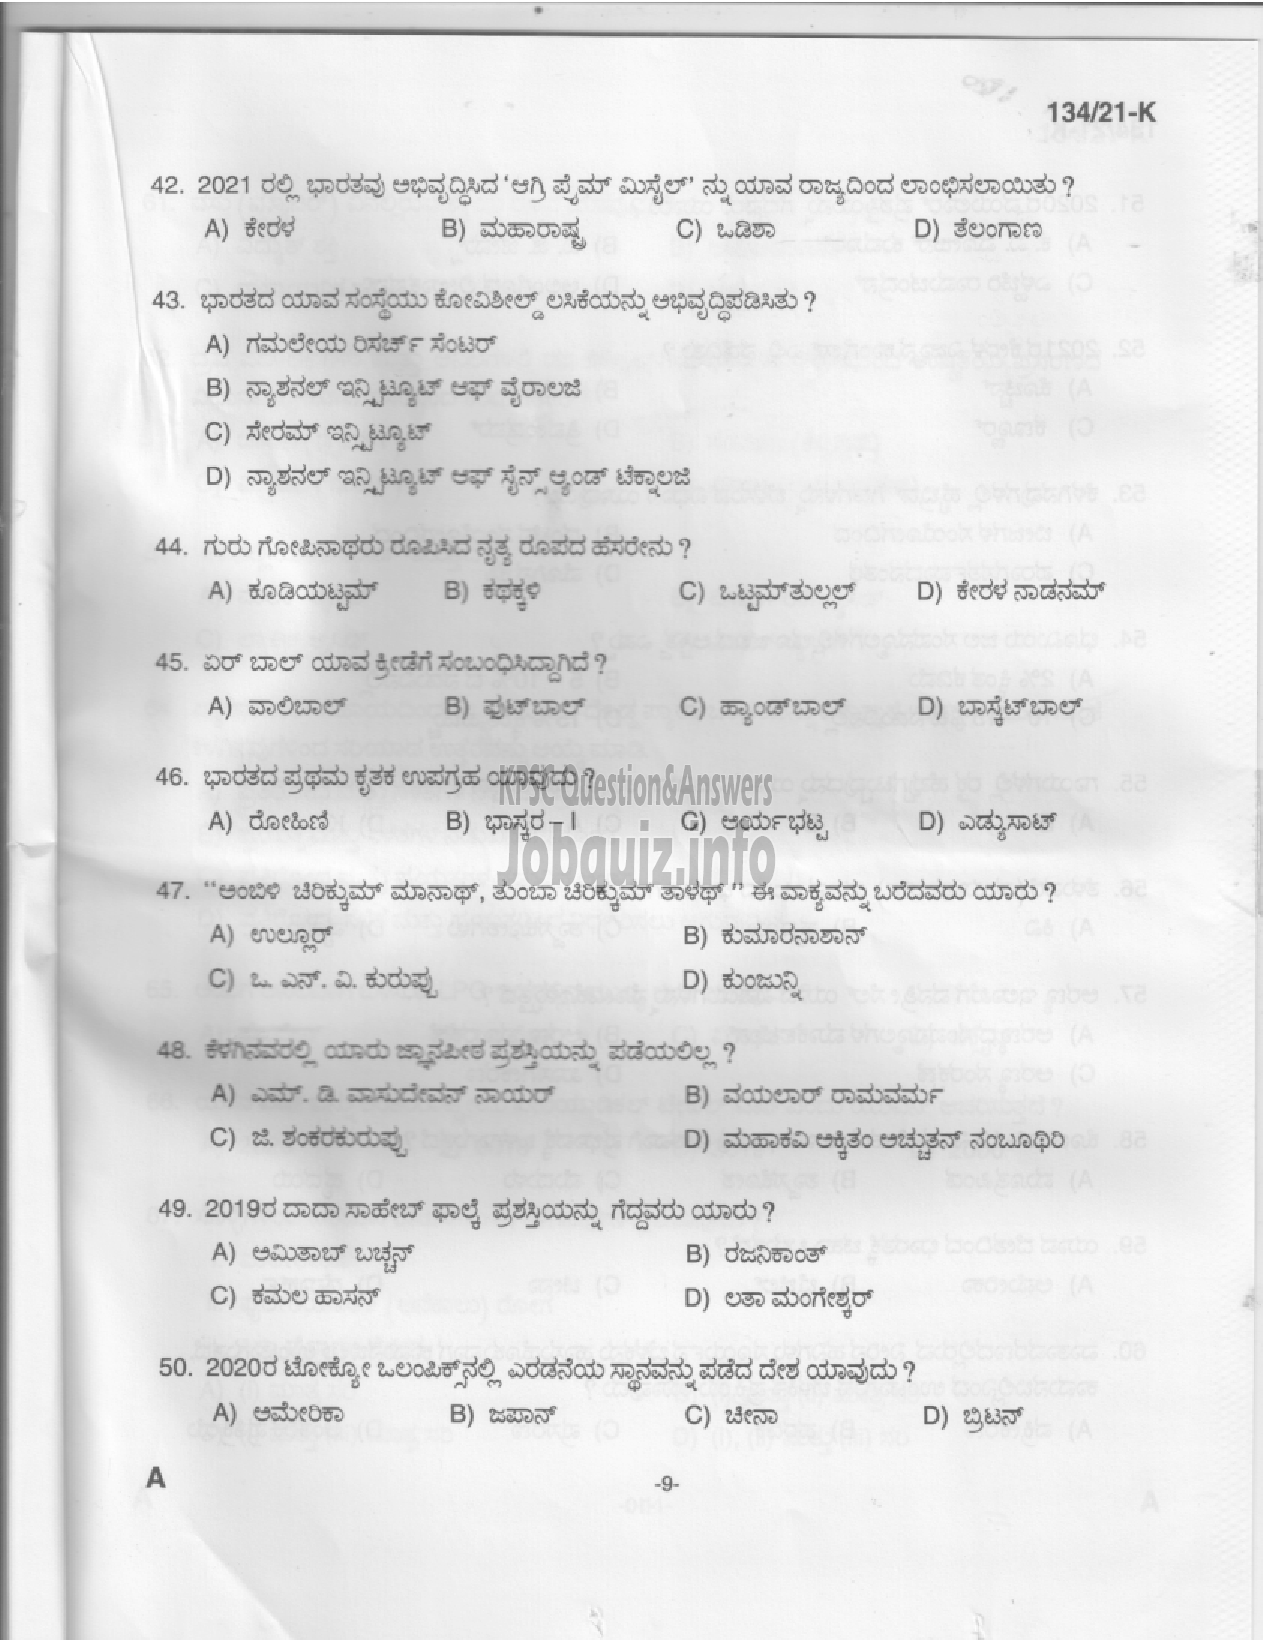 Kerala PSC Question Paper - Field Worker - Health Services-7